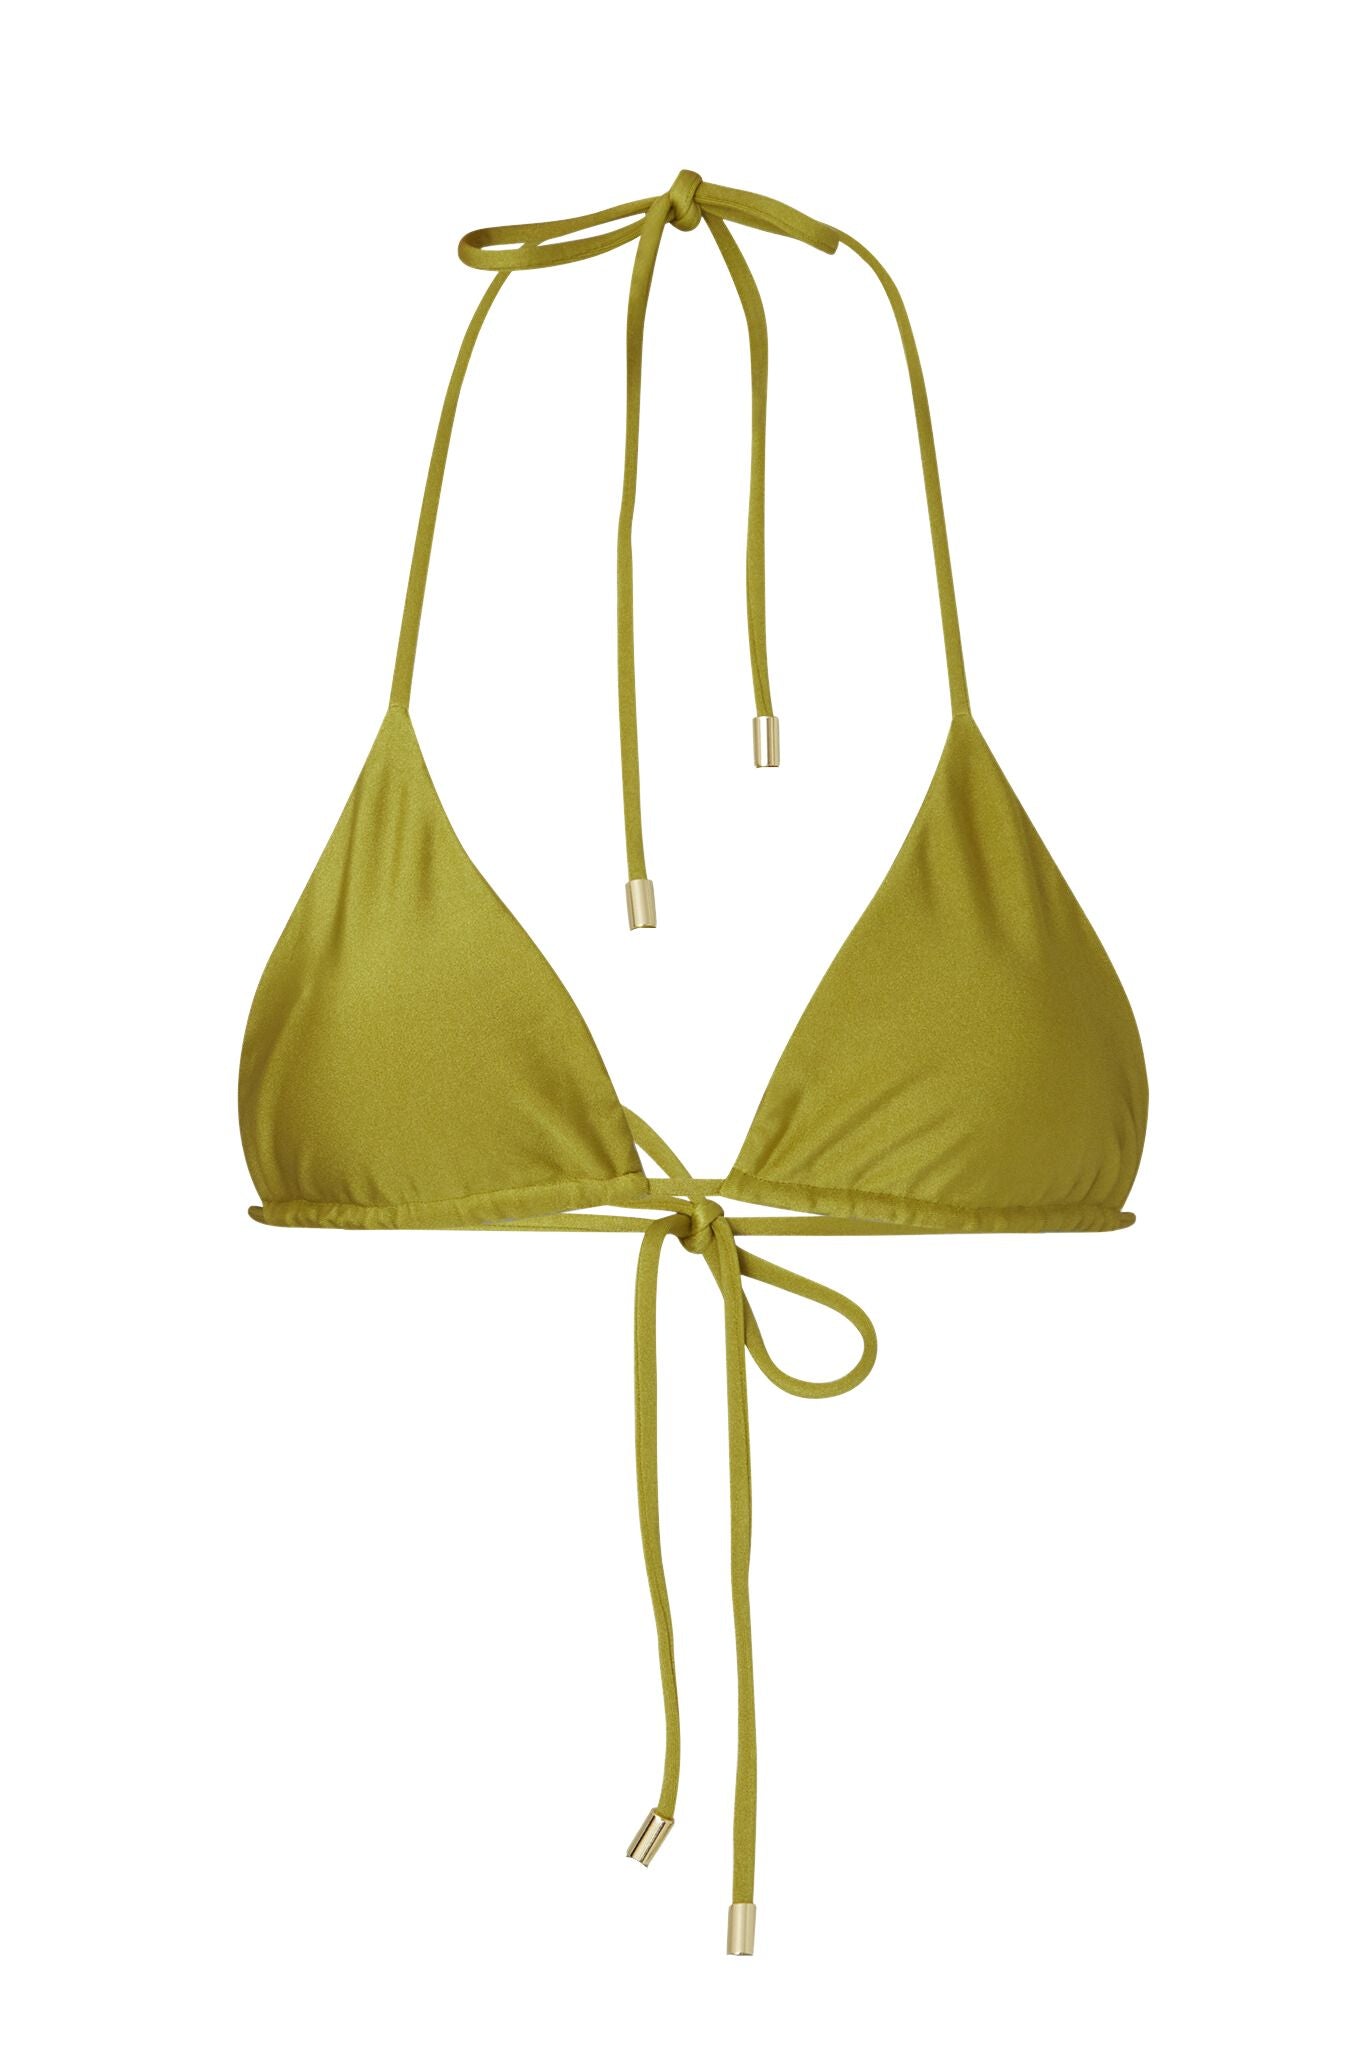 Buy DAGİ Pistachio Green Swimsuits, Low - Cut, Cupless, Non-wired